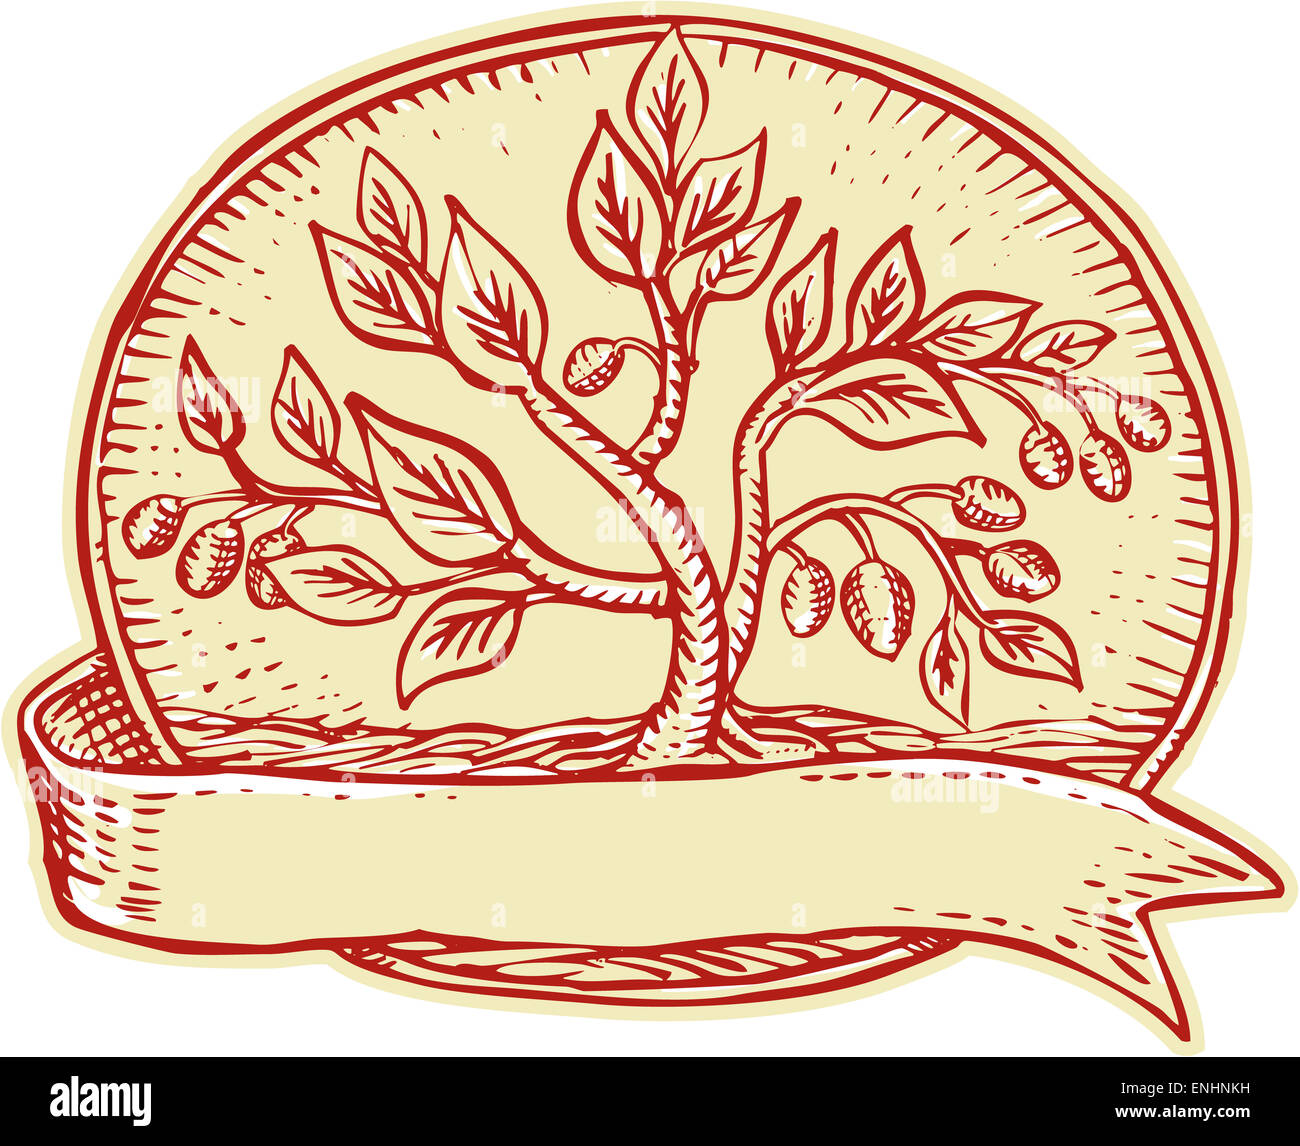 Etching engraving handmade style illustration of an olive tree set inside oval with ribbon on isolated background. Stock Photo